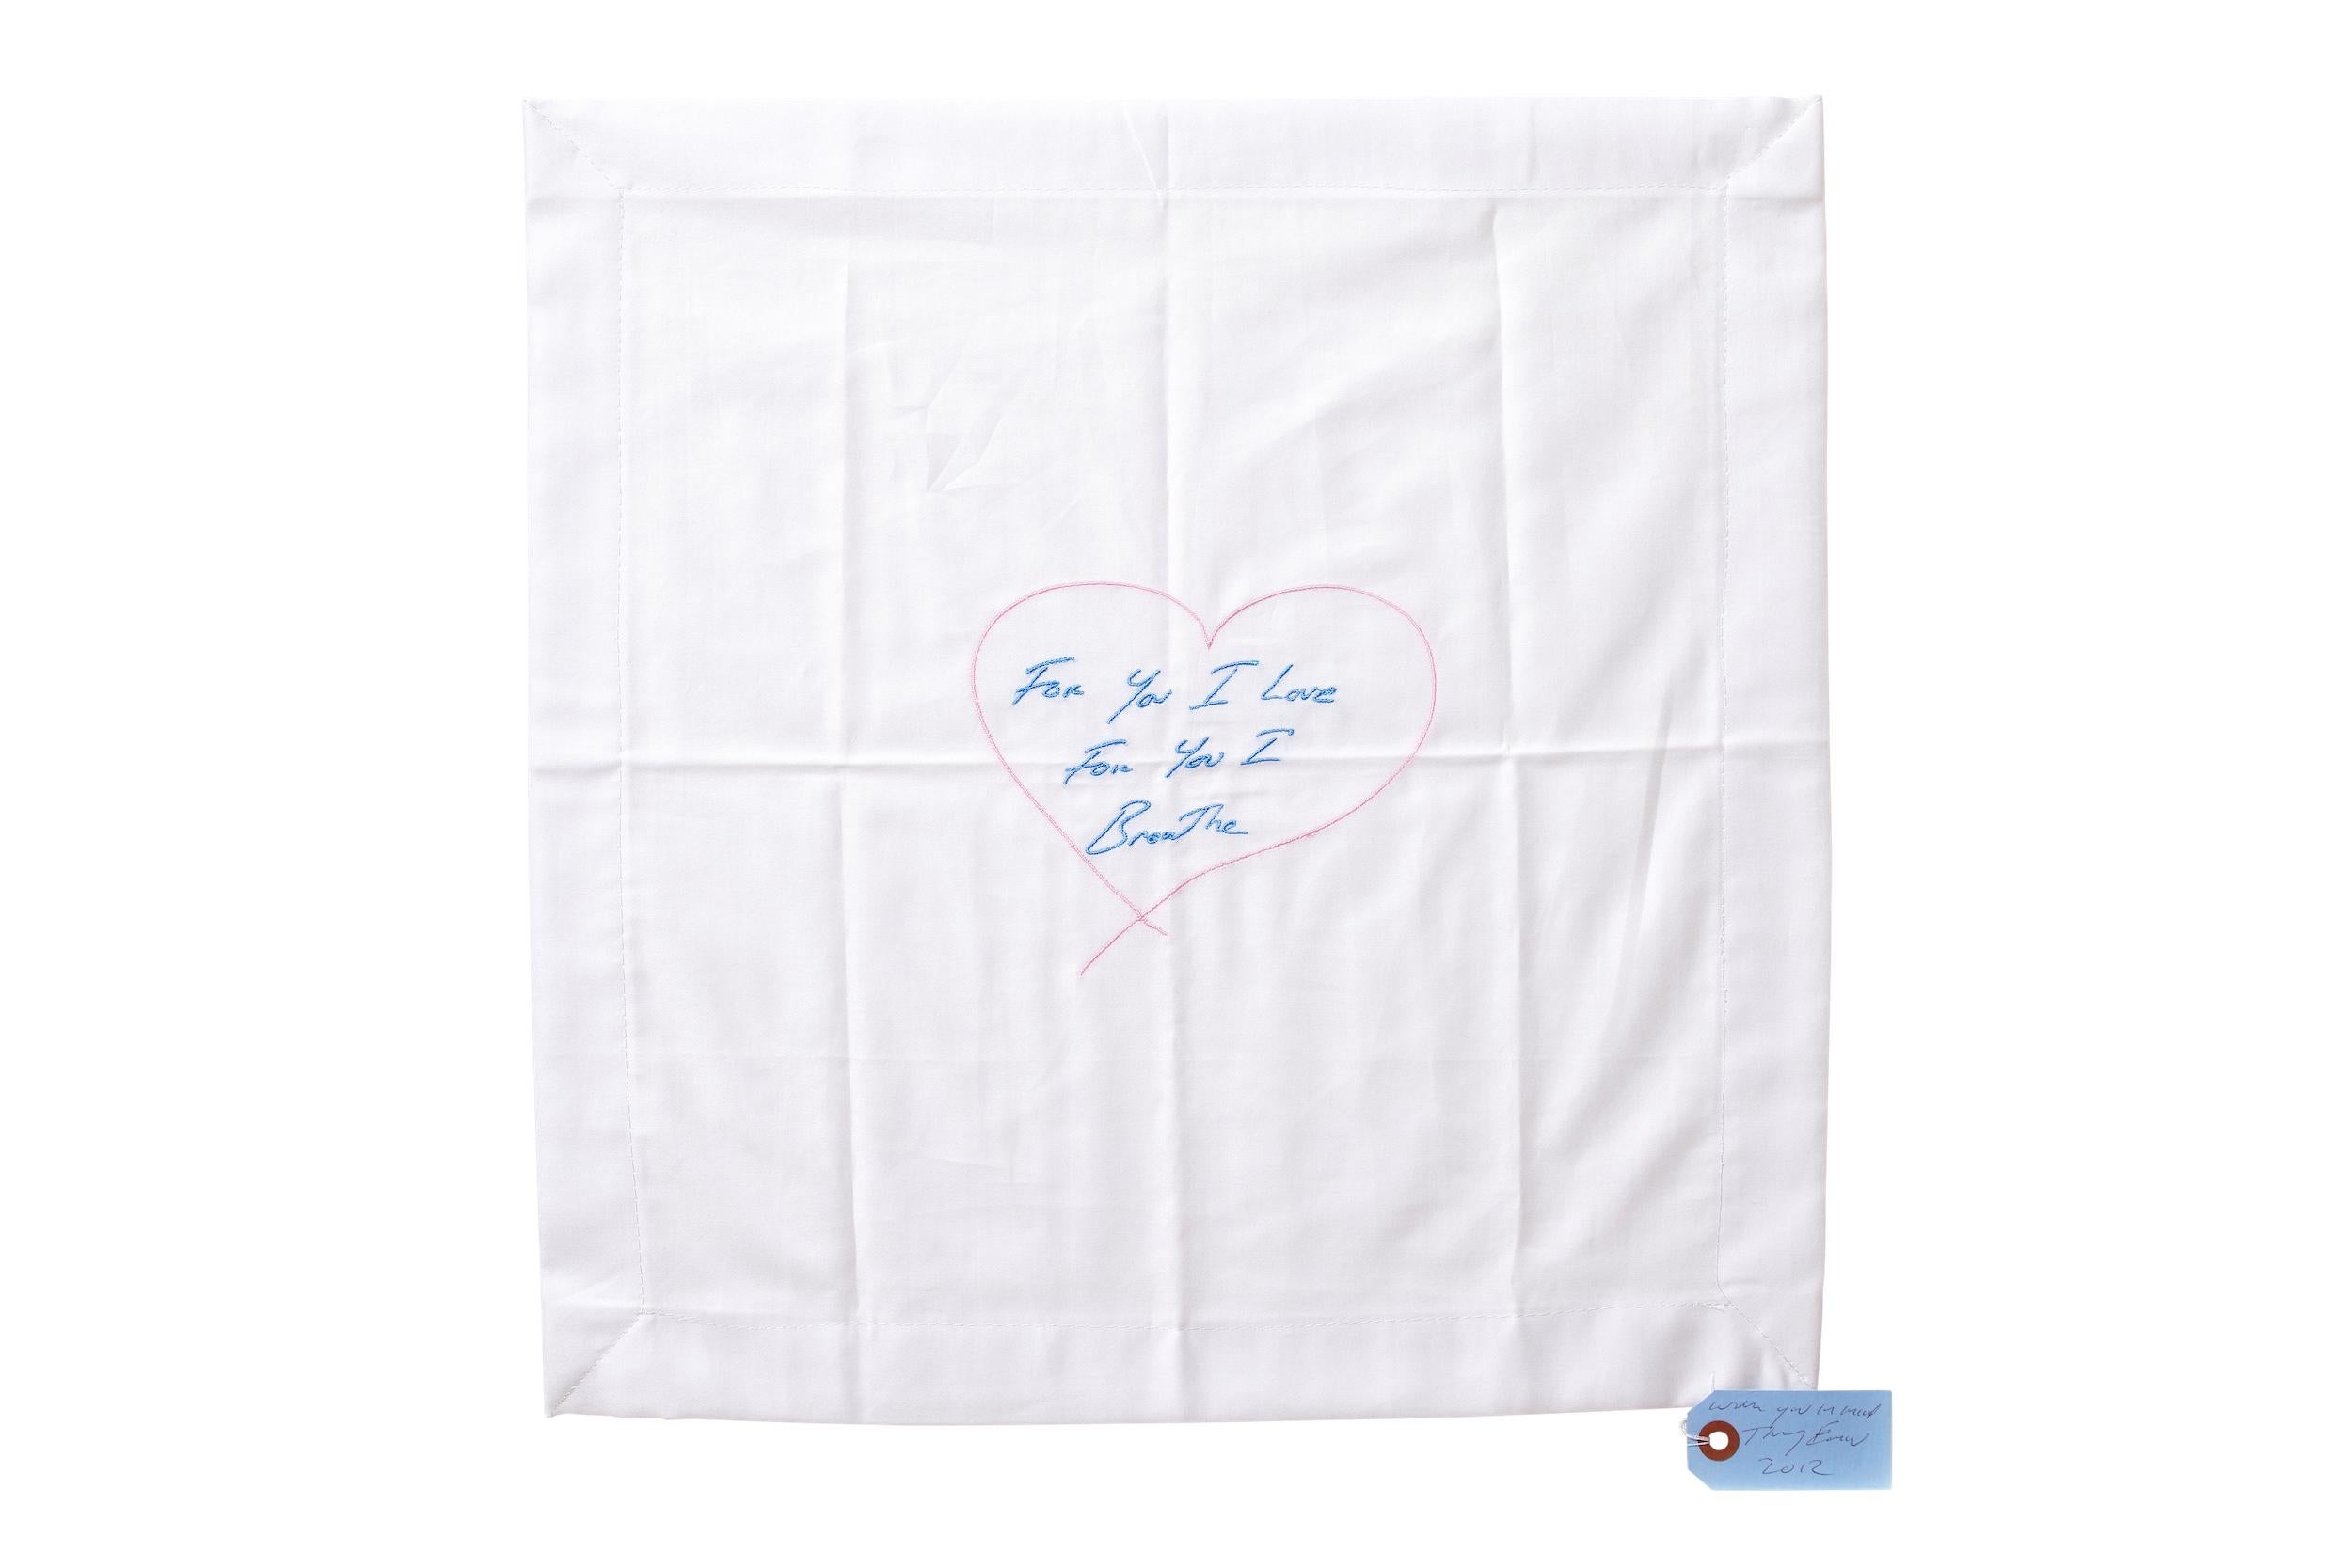 For You I Love, For You I Breathe, 2012
Tracey Emin 

Embroidery, on linen napkin
Signed, dated and dedicated ‘With you in mind’
on the accompanying swing tag as issued
The edition size is believed to be only 50
Multiple: 44 × 44 cm (17.3 × 17.3